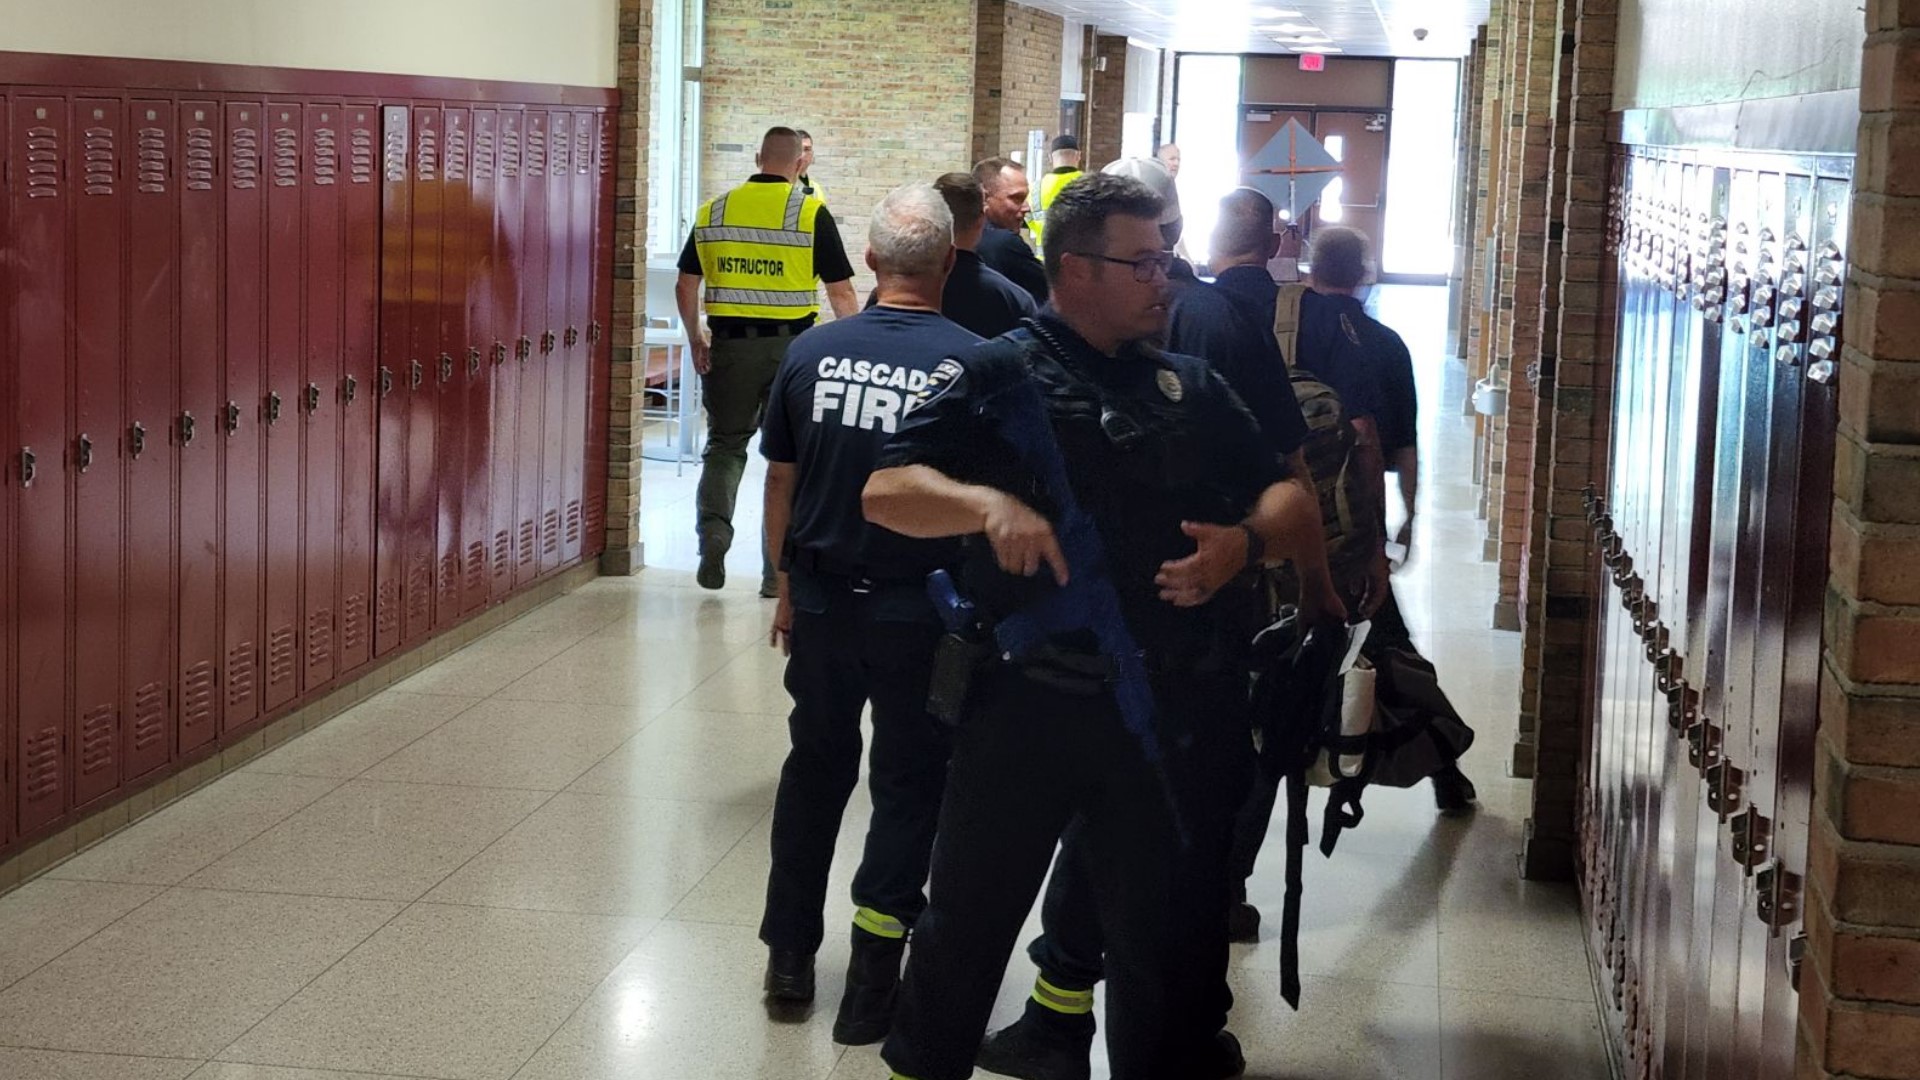 Police and fire departments in Kent County are training to respond to active shooter and stabbing situations.